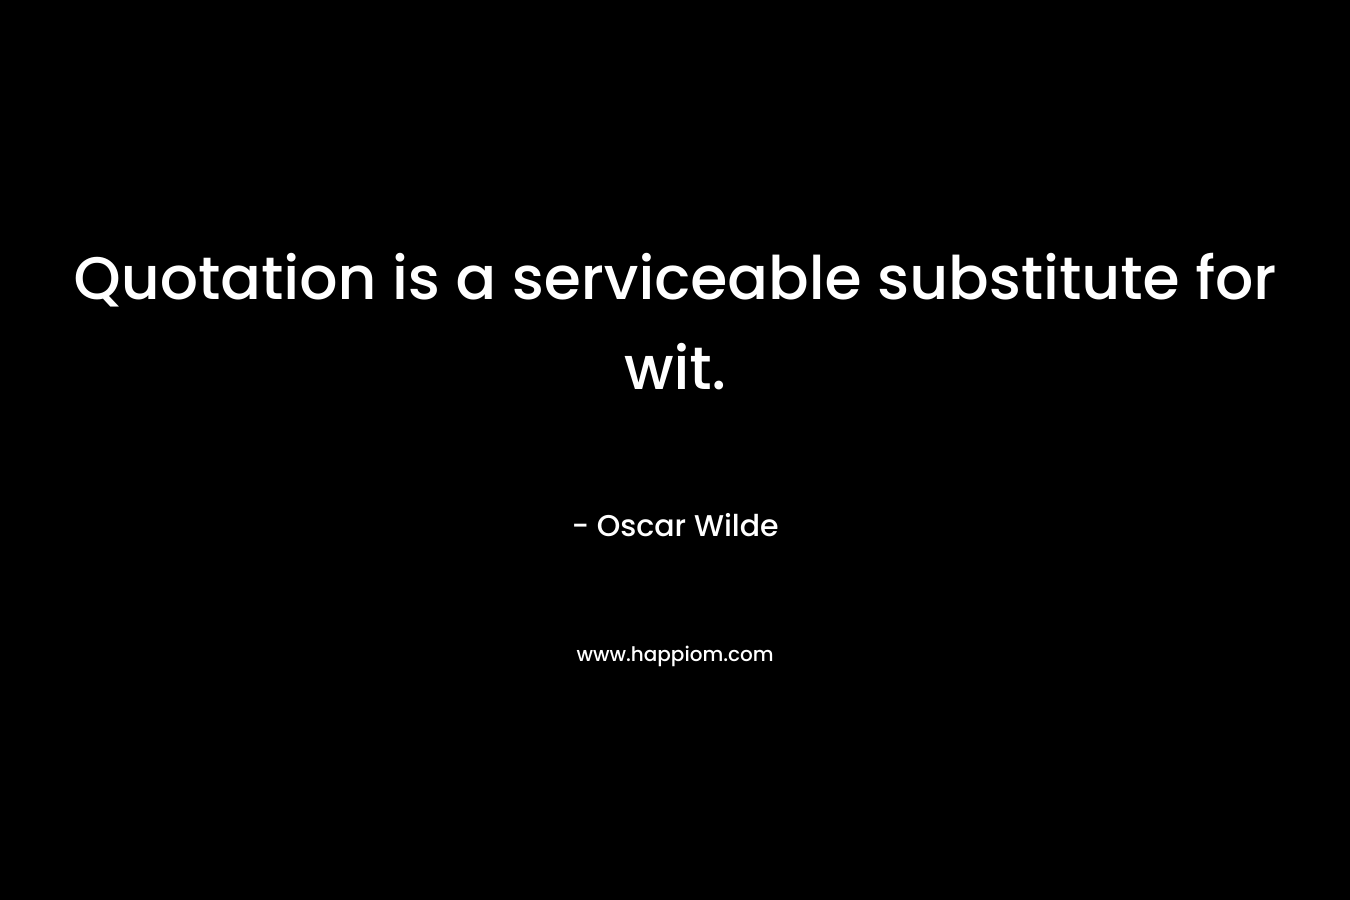 Quotation is a serviceable substitute for wit.